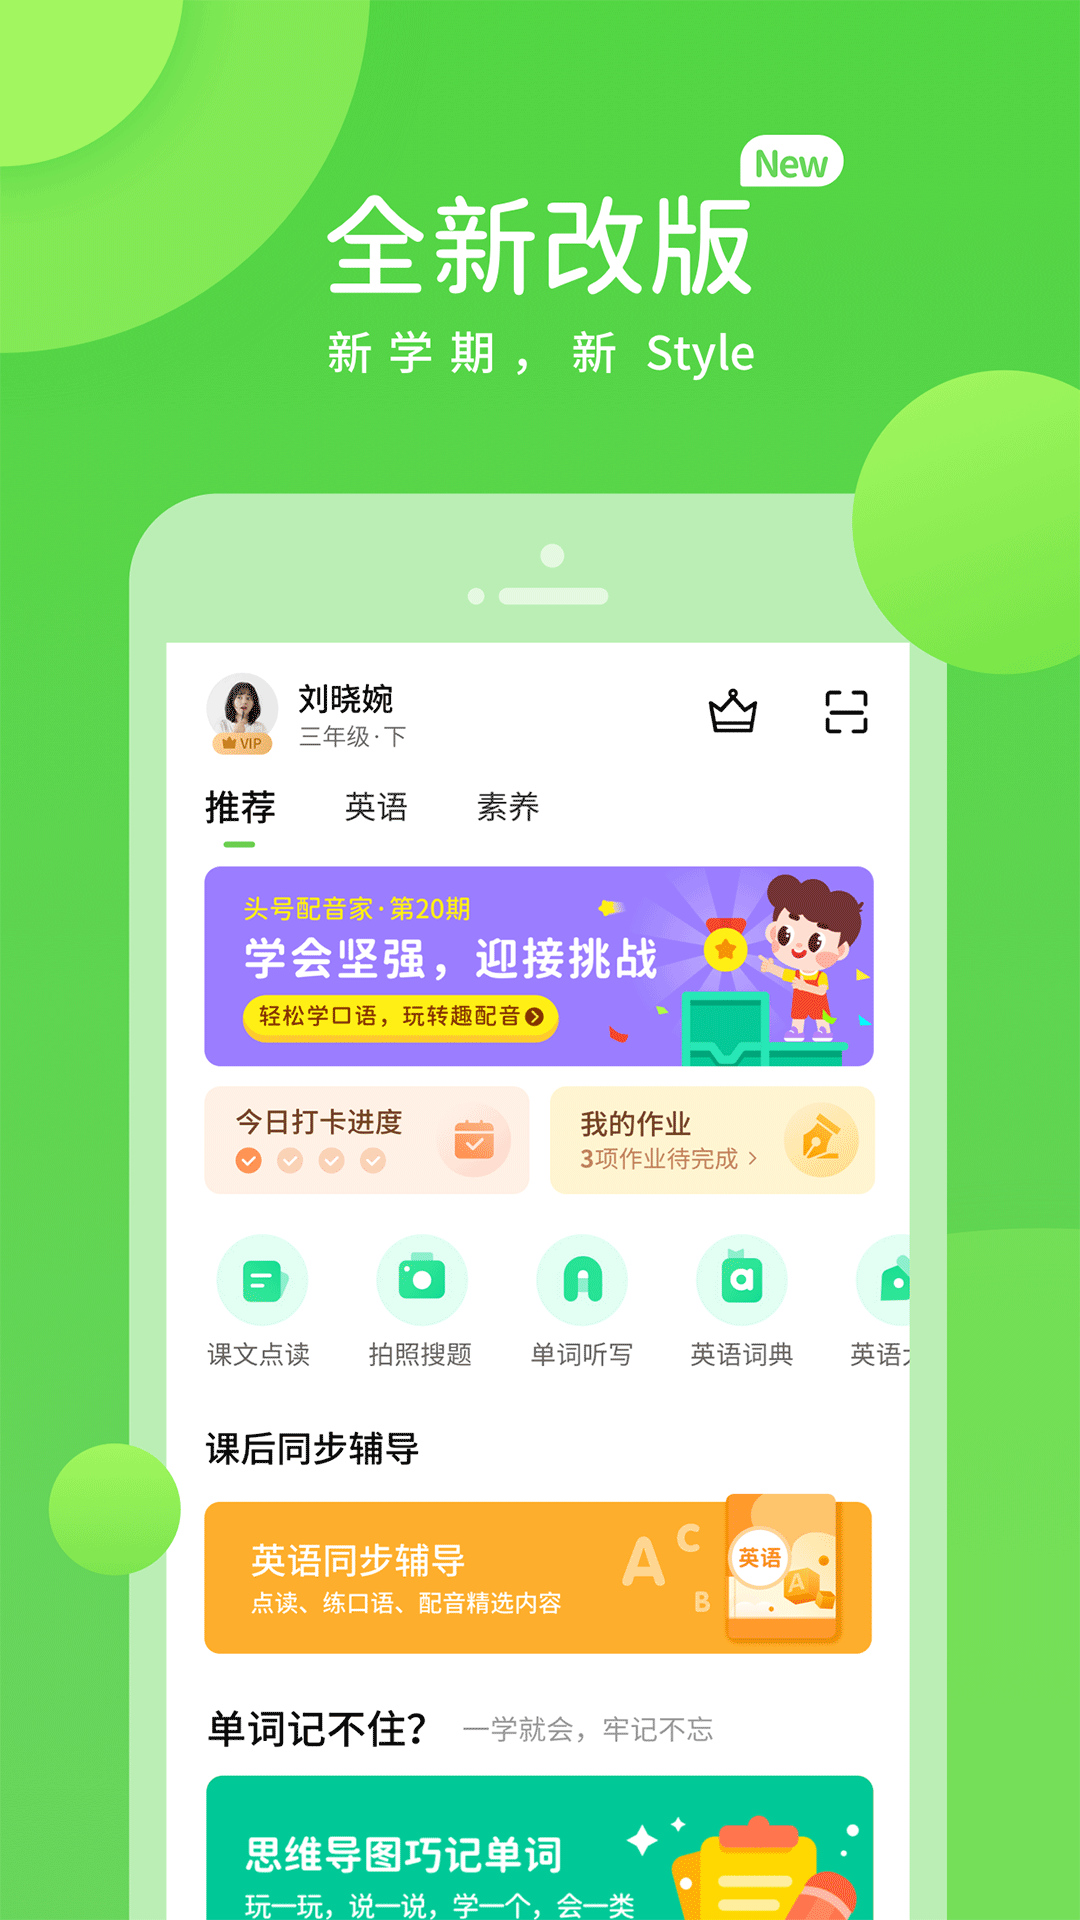 ѧϰAIappѰv5.0.6.0 ֻ